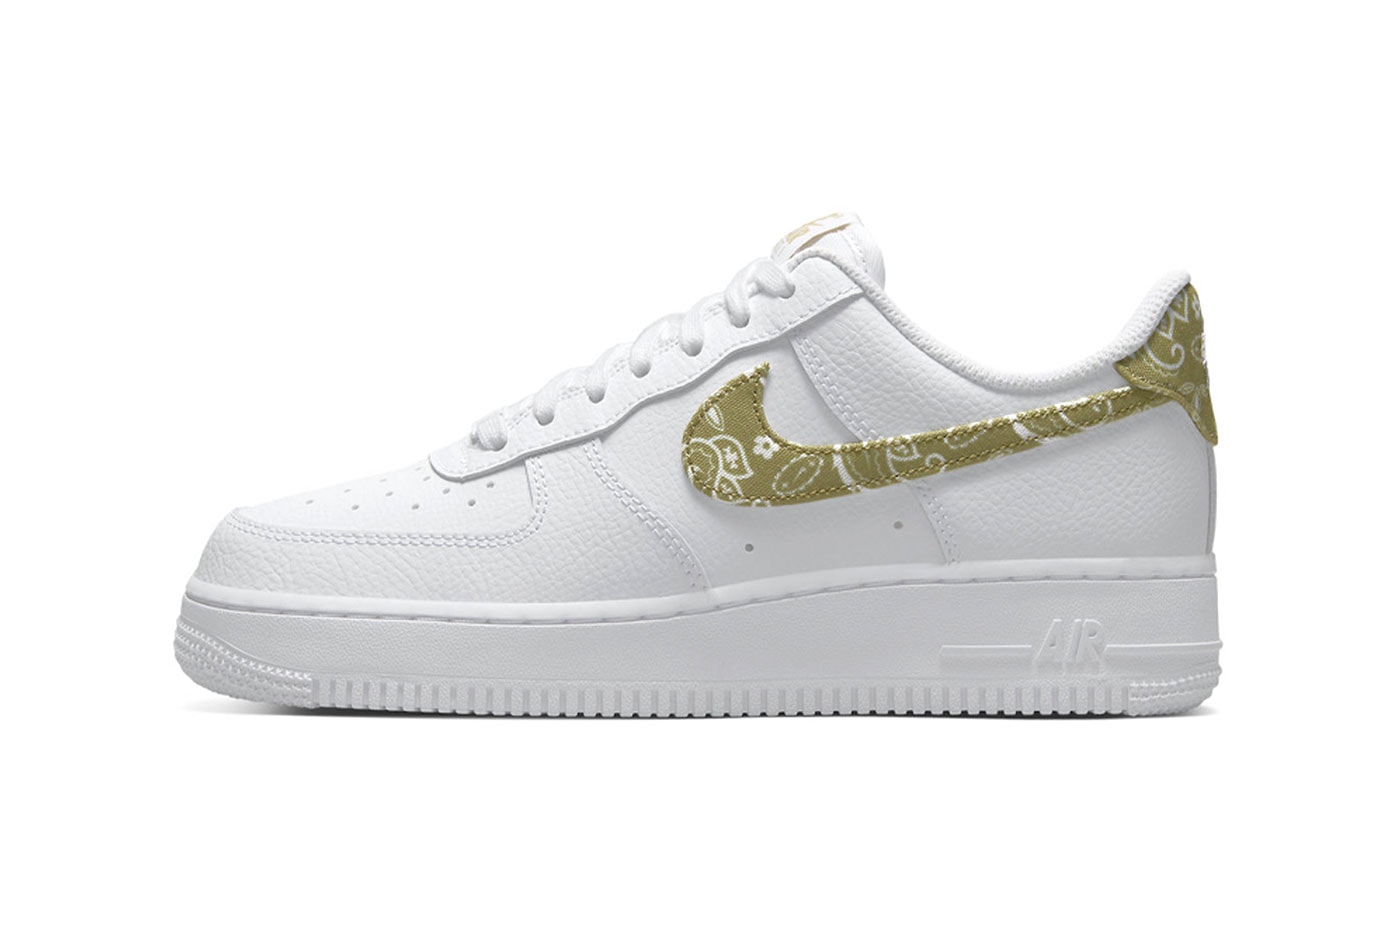 Nike Air Force 1 Low Olive Paisley dj9942-101 white 100 USD release info date price 